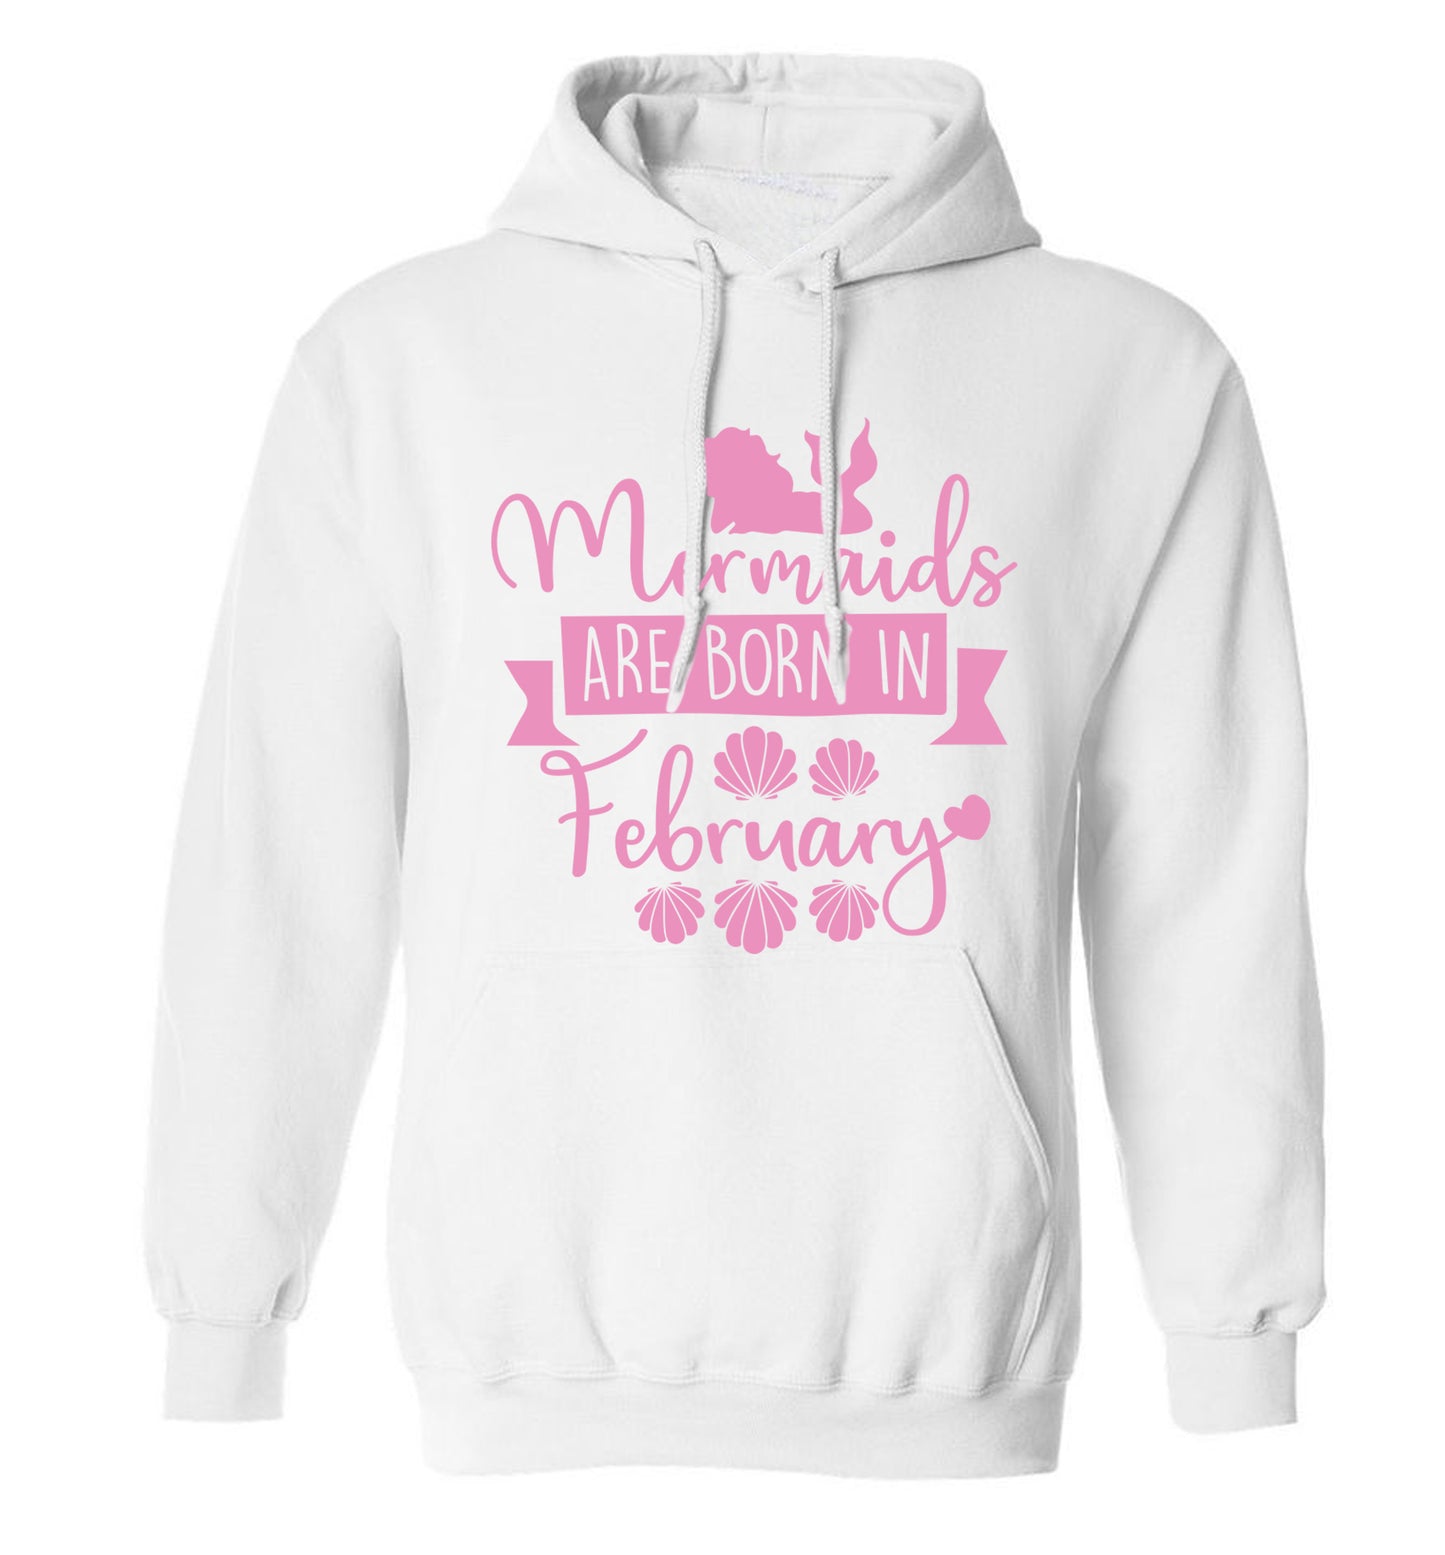 Mermaids are born in February adults unisex white hoodie 2XL